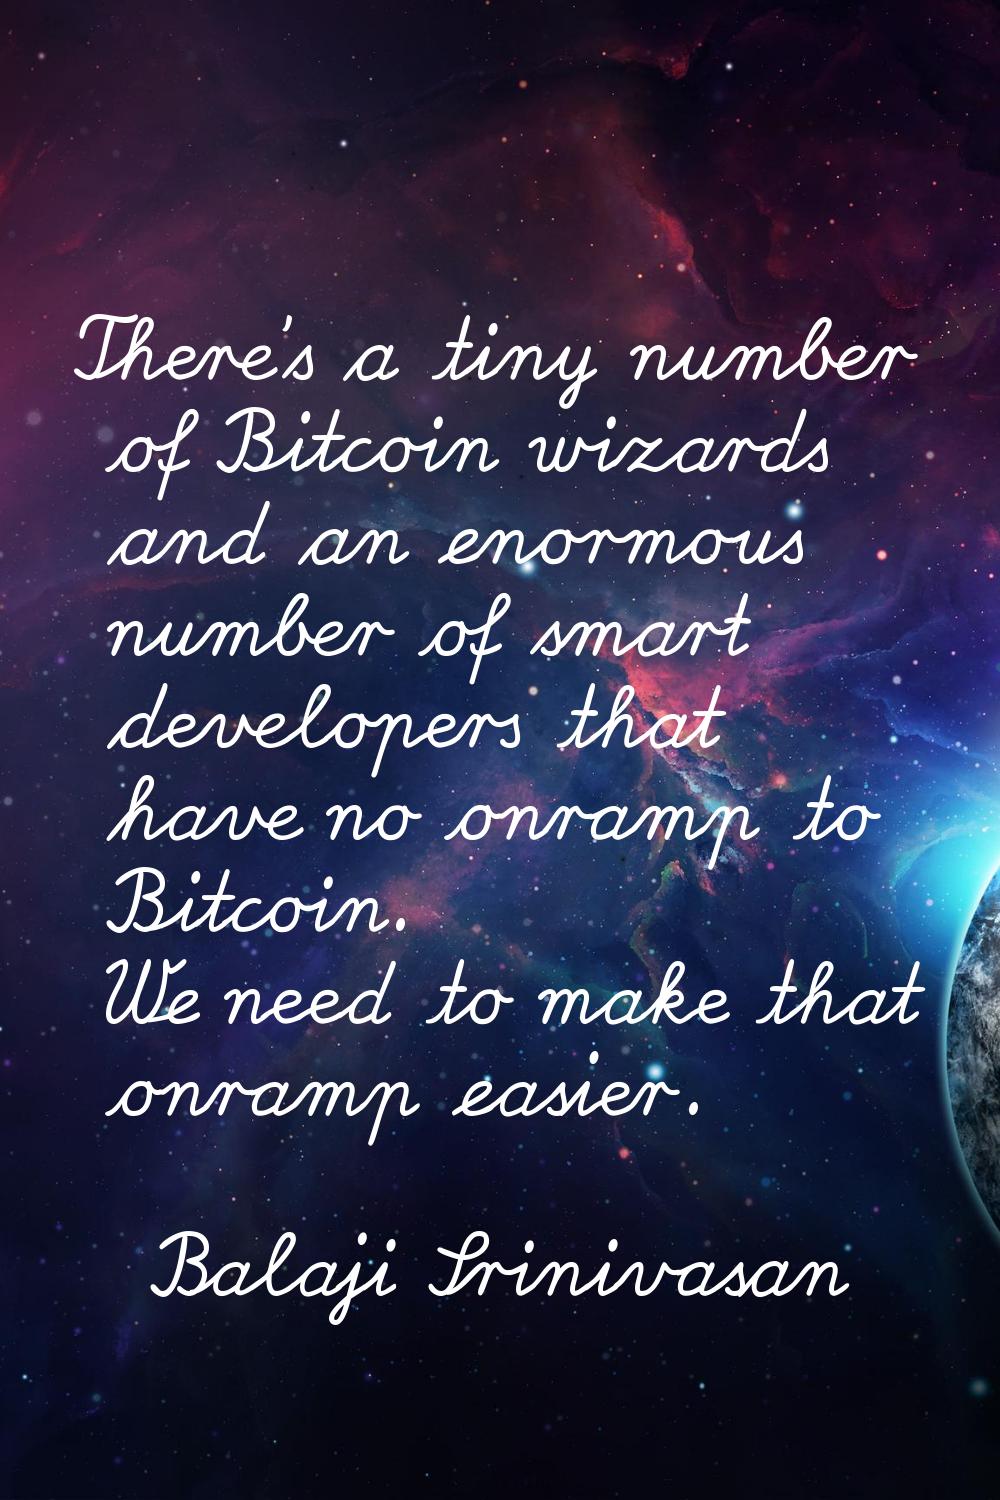 There's a tiny number of Bitcoin wizards and an enormous number of smart developers that have no on